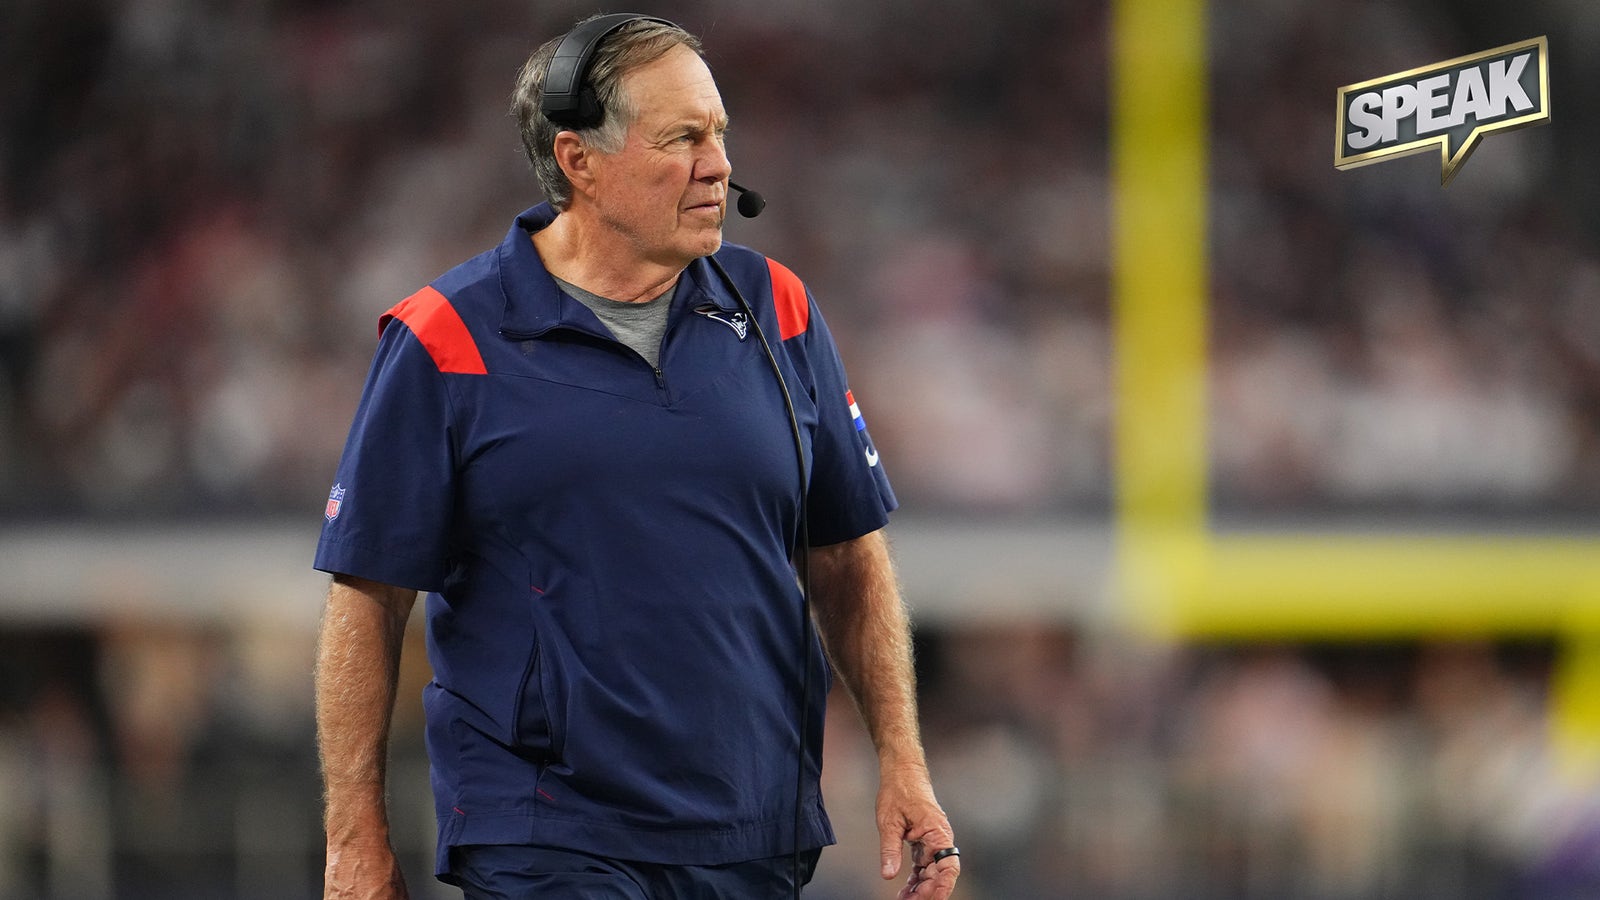 Has Bill Belichick's legacy taken a hit with Patriots' ongoing struggles? 